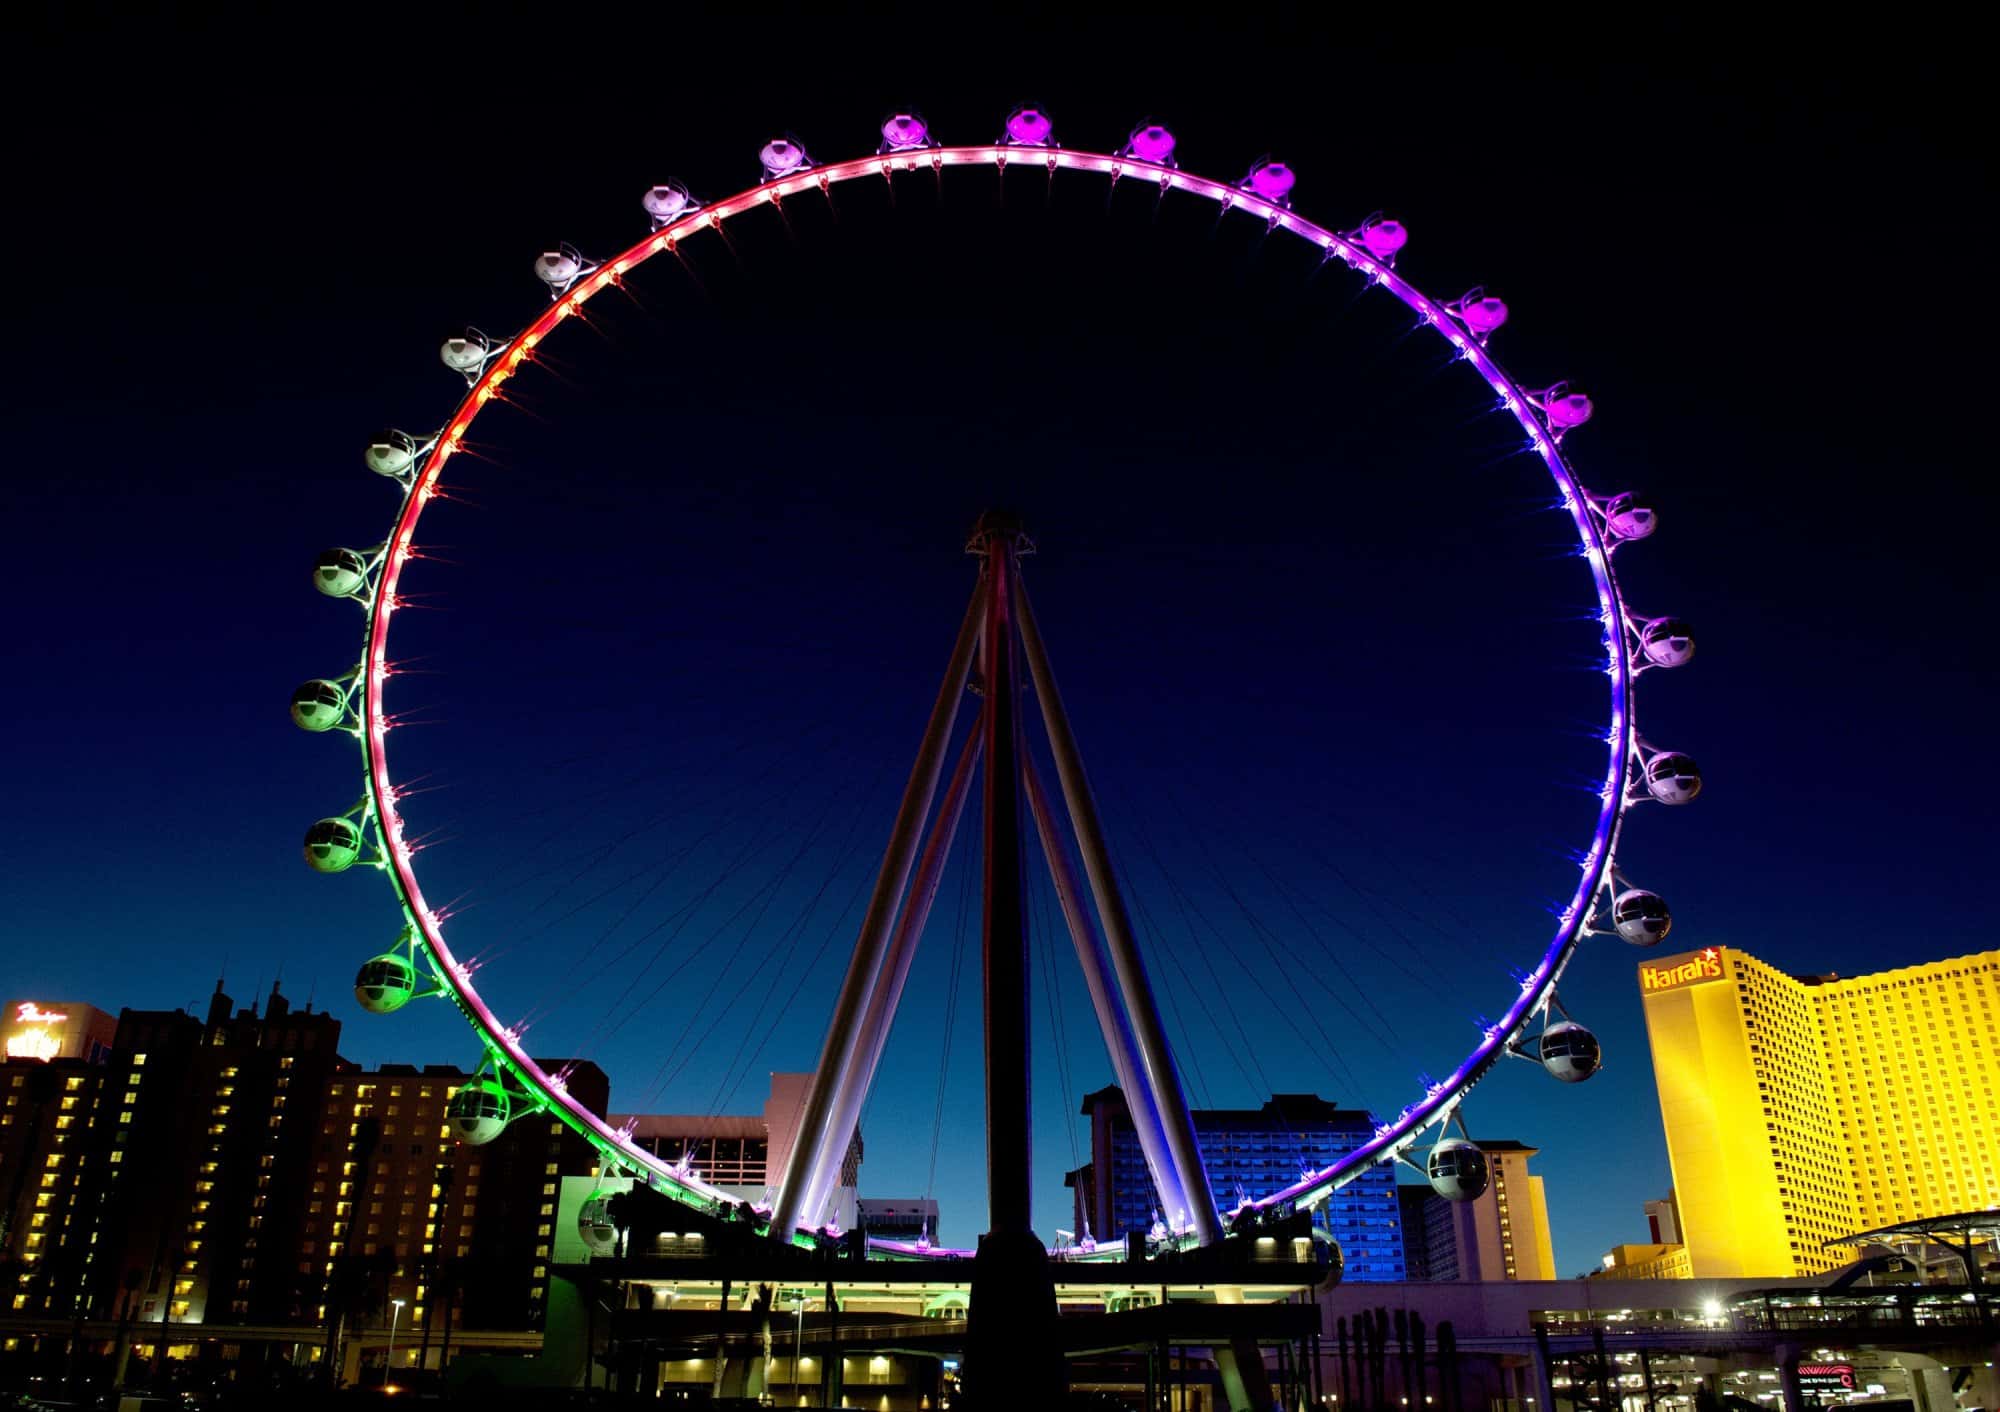 Las Vegas: From Red Rock to the Bellagio, the top Vegas attractions offer an eclectic array